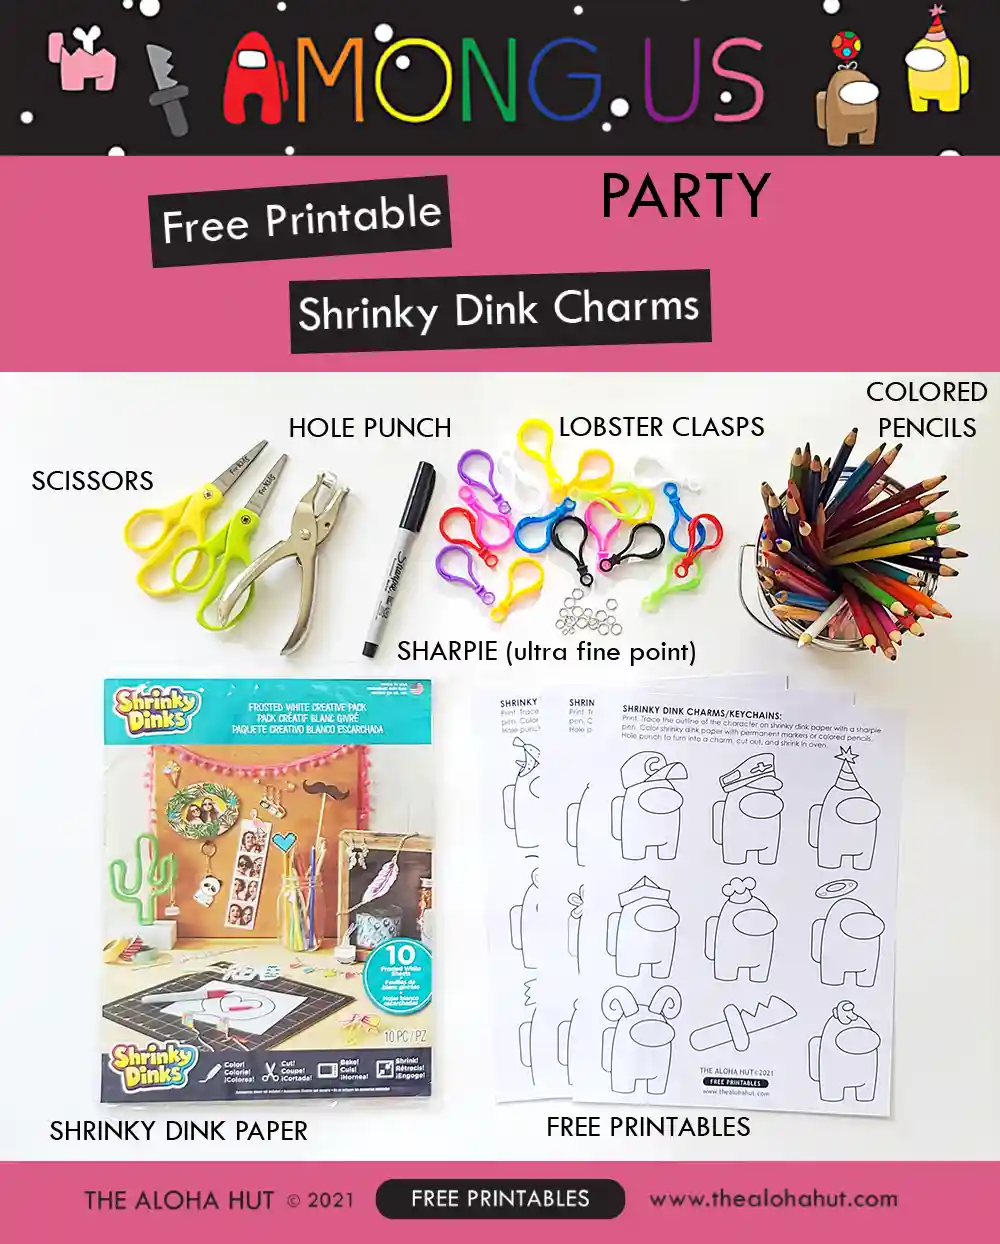 Among Us shrinky dinks craft and kids activity. Make your own DIY Among Us keychains and charms. This is an easy kids craft and would be such a fun activity at an Among Us kids birthday party!!